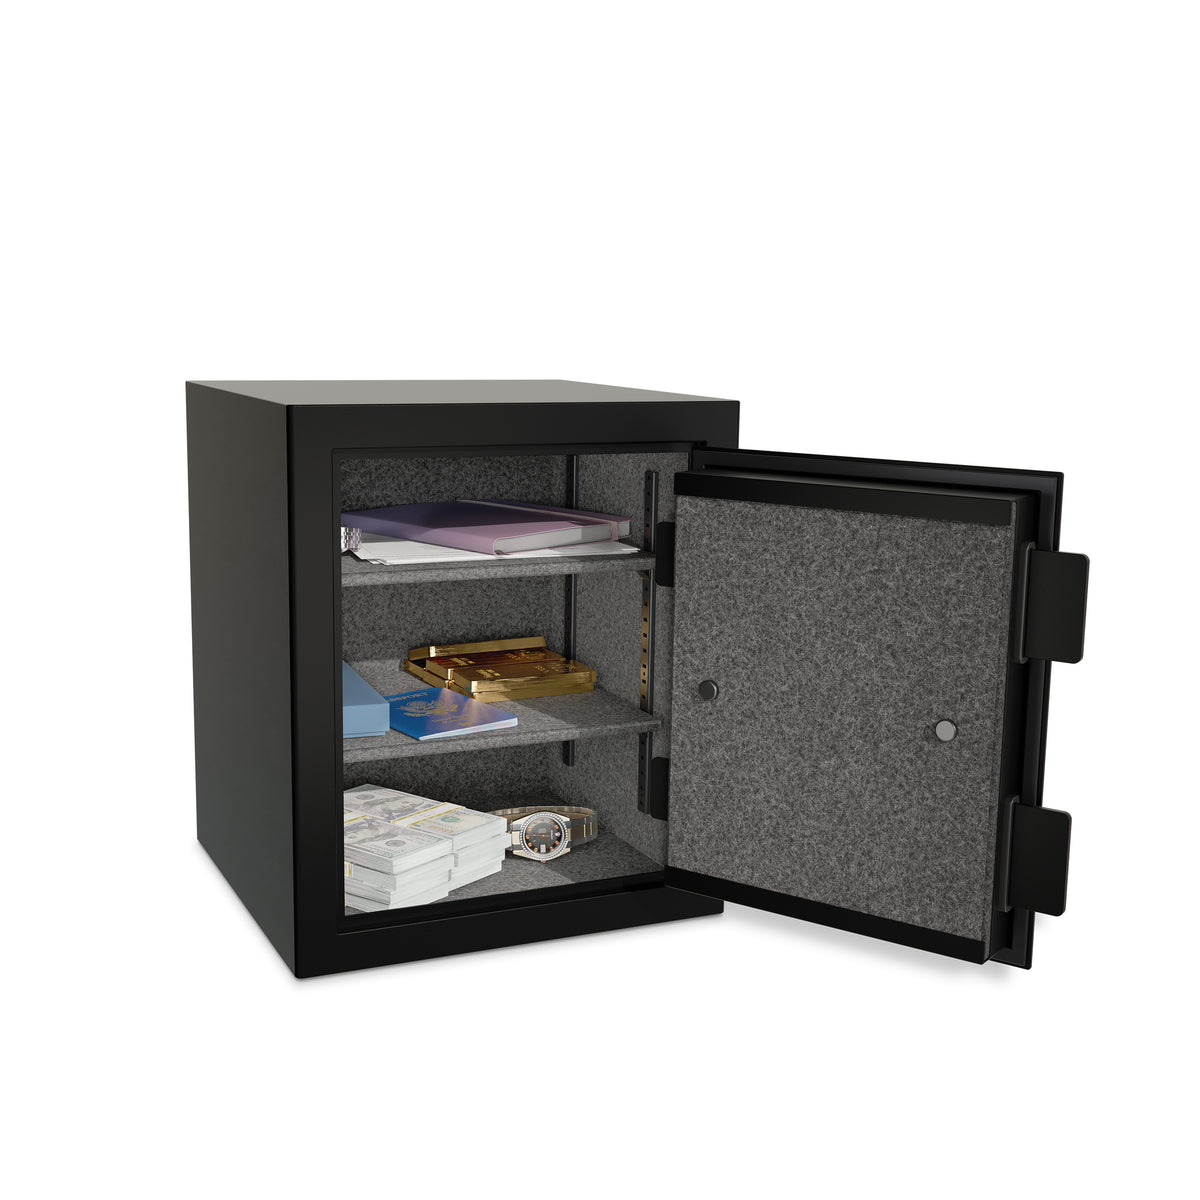 Sports Afield SA-ONYX2 Home &amp; Office Fireproof Safe Door Open Full